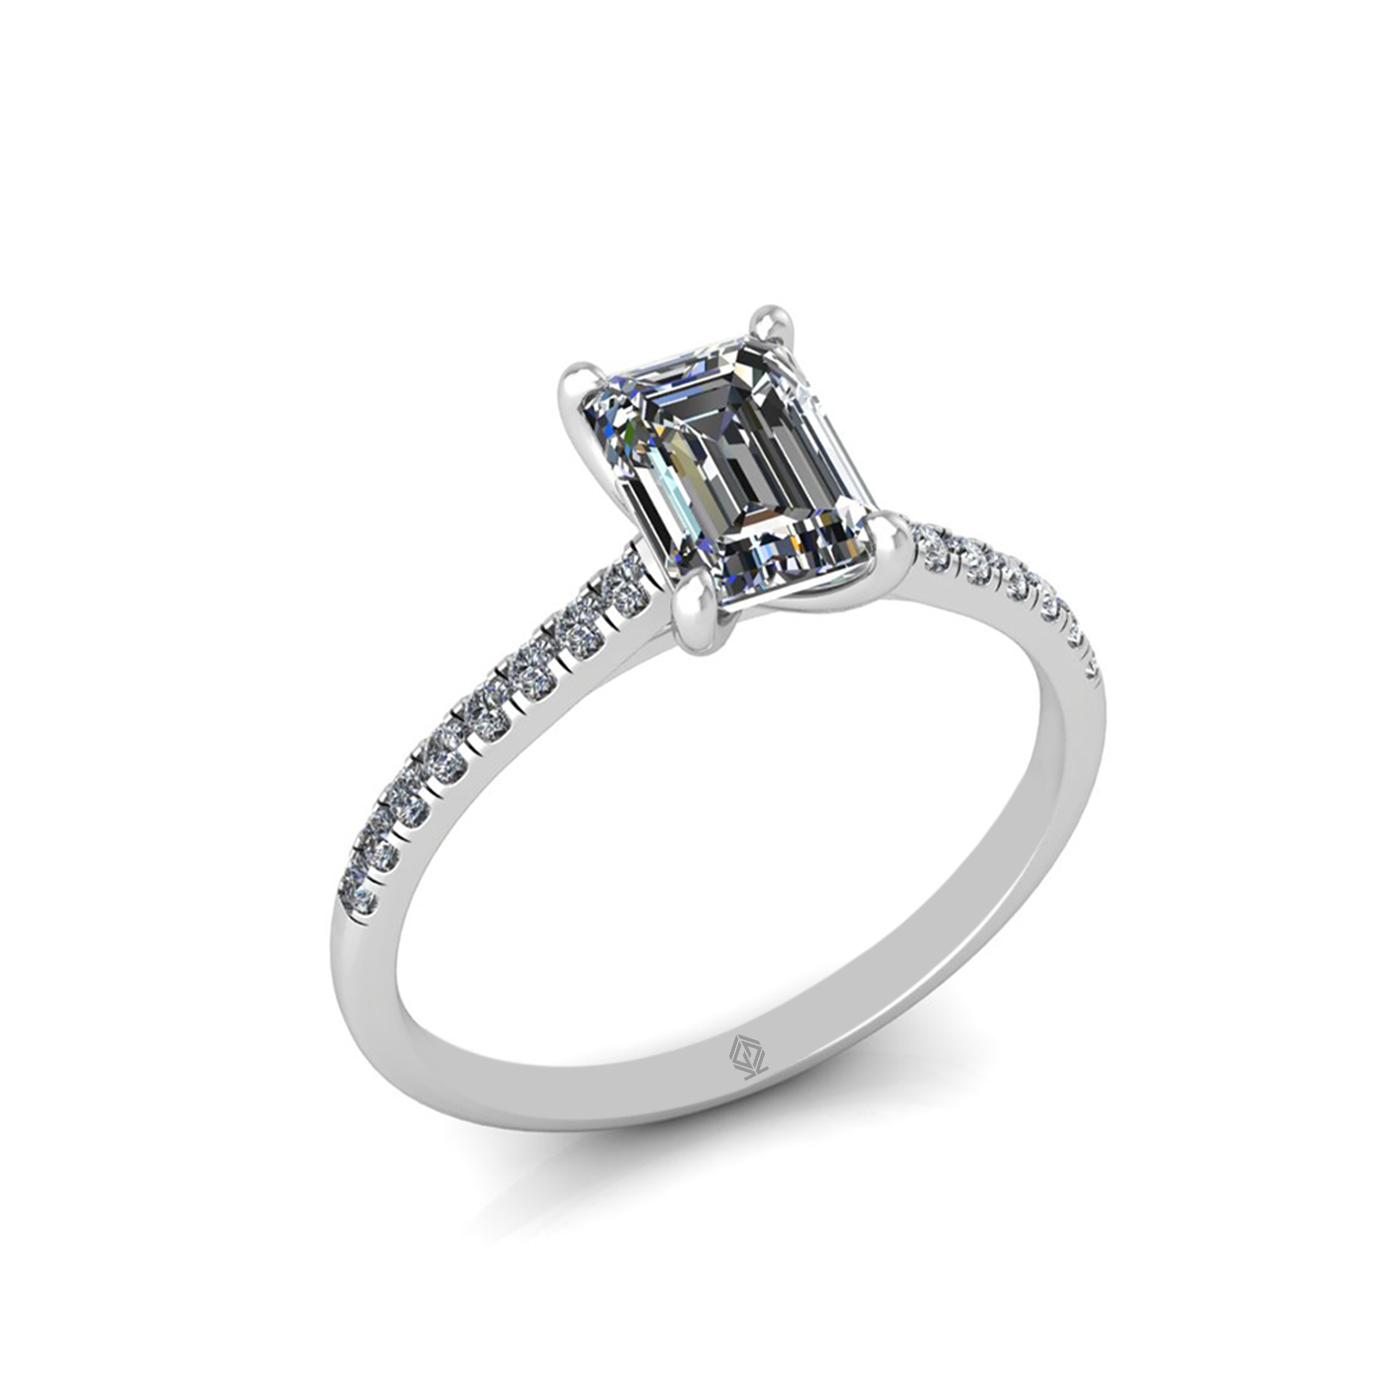 18k white gold 1.0ct 4 prongs emerald cut diamond engagement ring with whisper thin pavÉ set band Photos & images